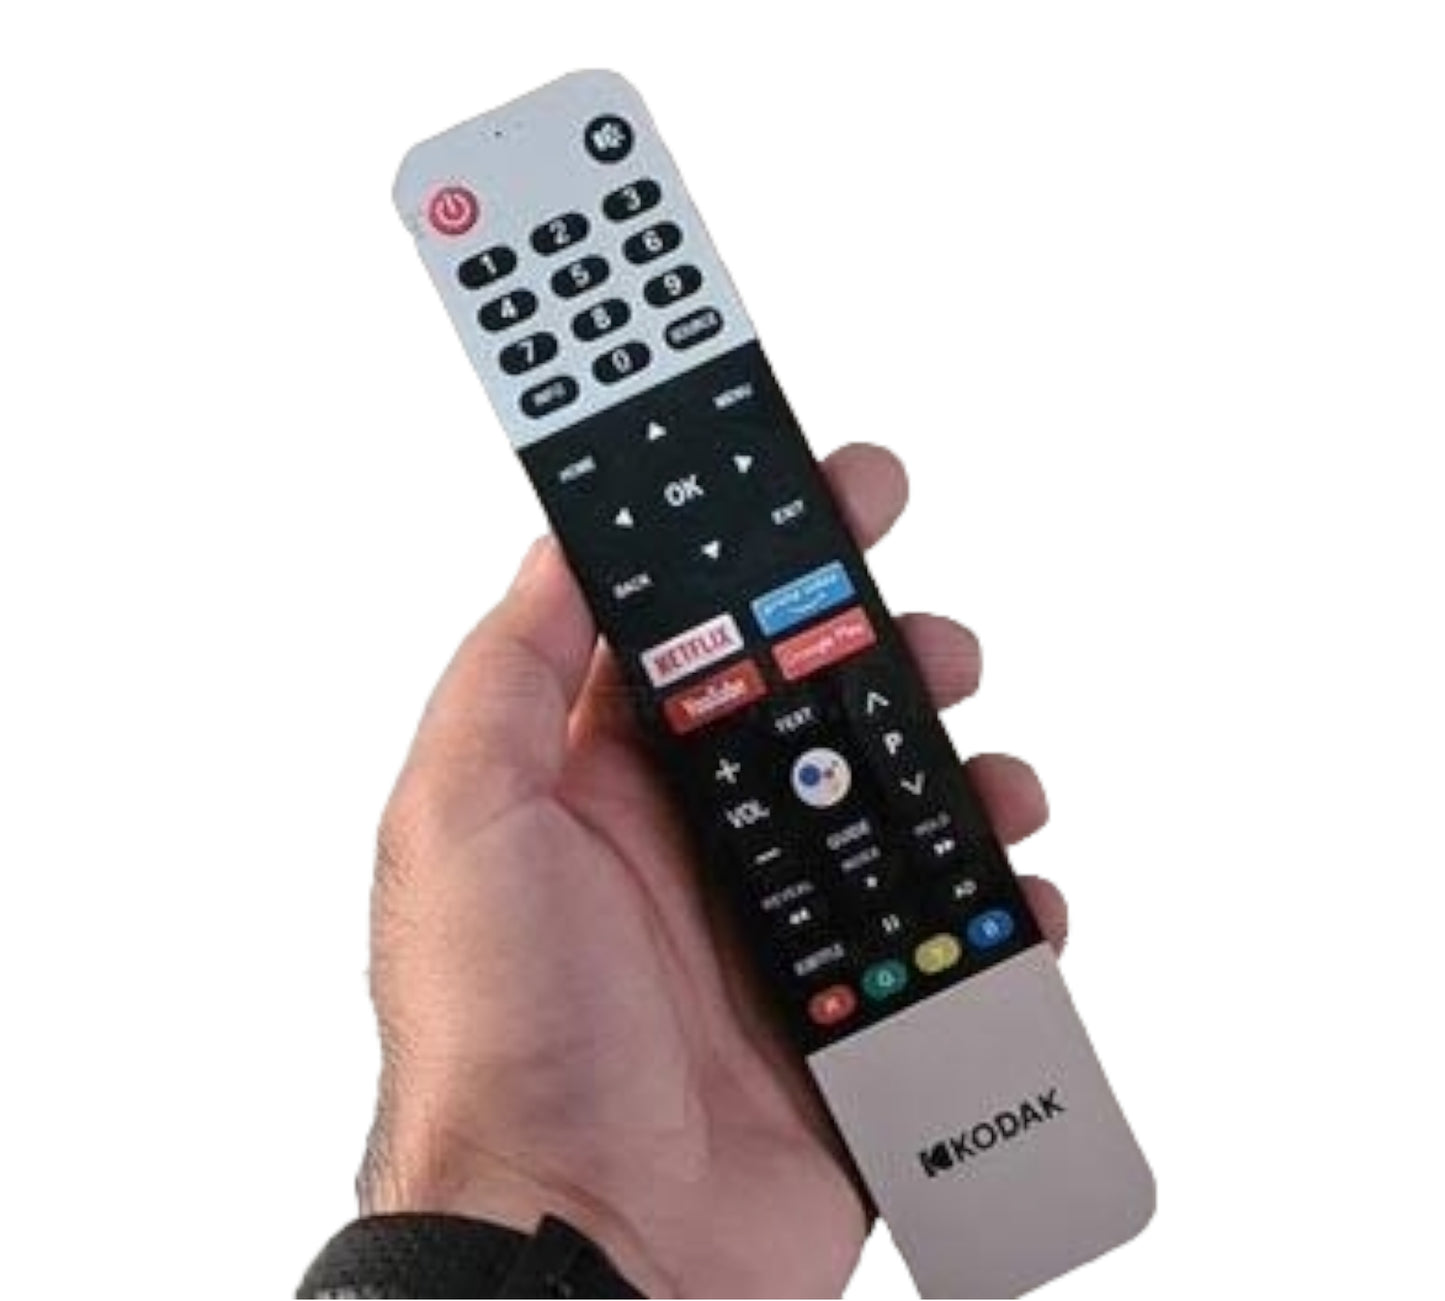 kodak Smart led tv remote with Google voice recognition and YouTube and Netflix and Amazon prime video